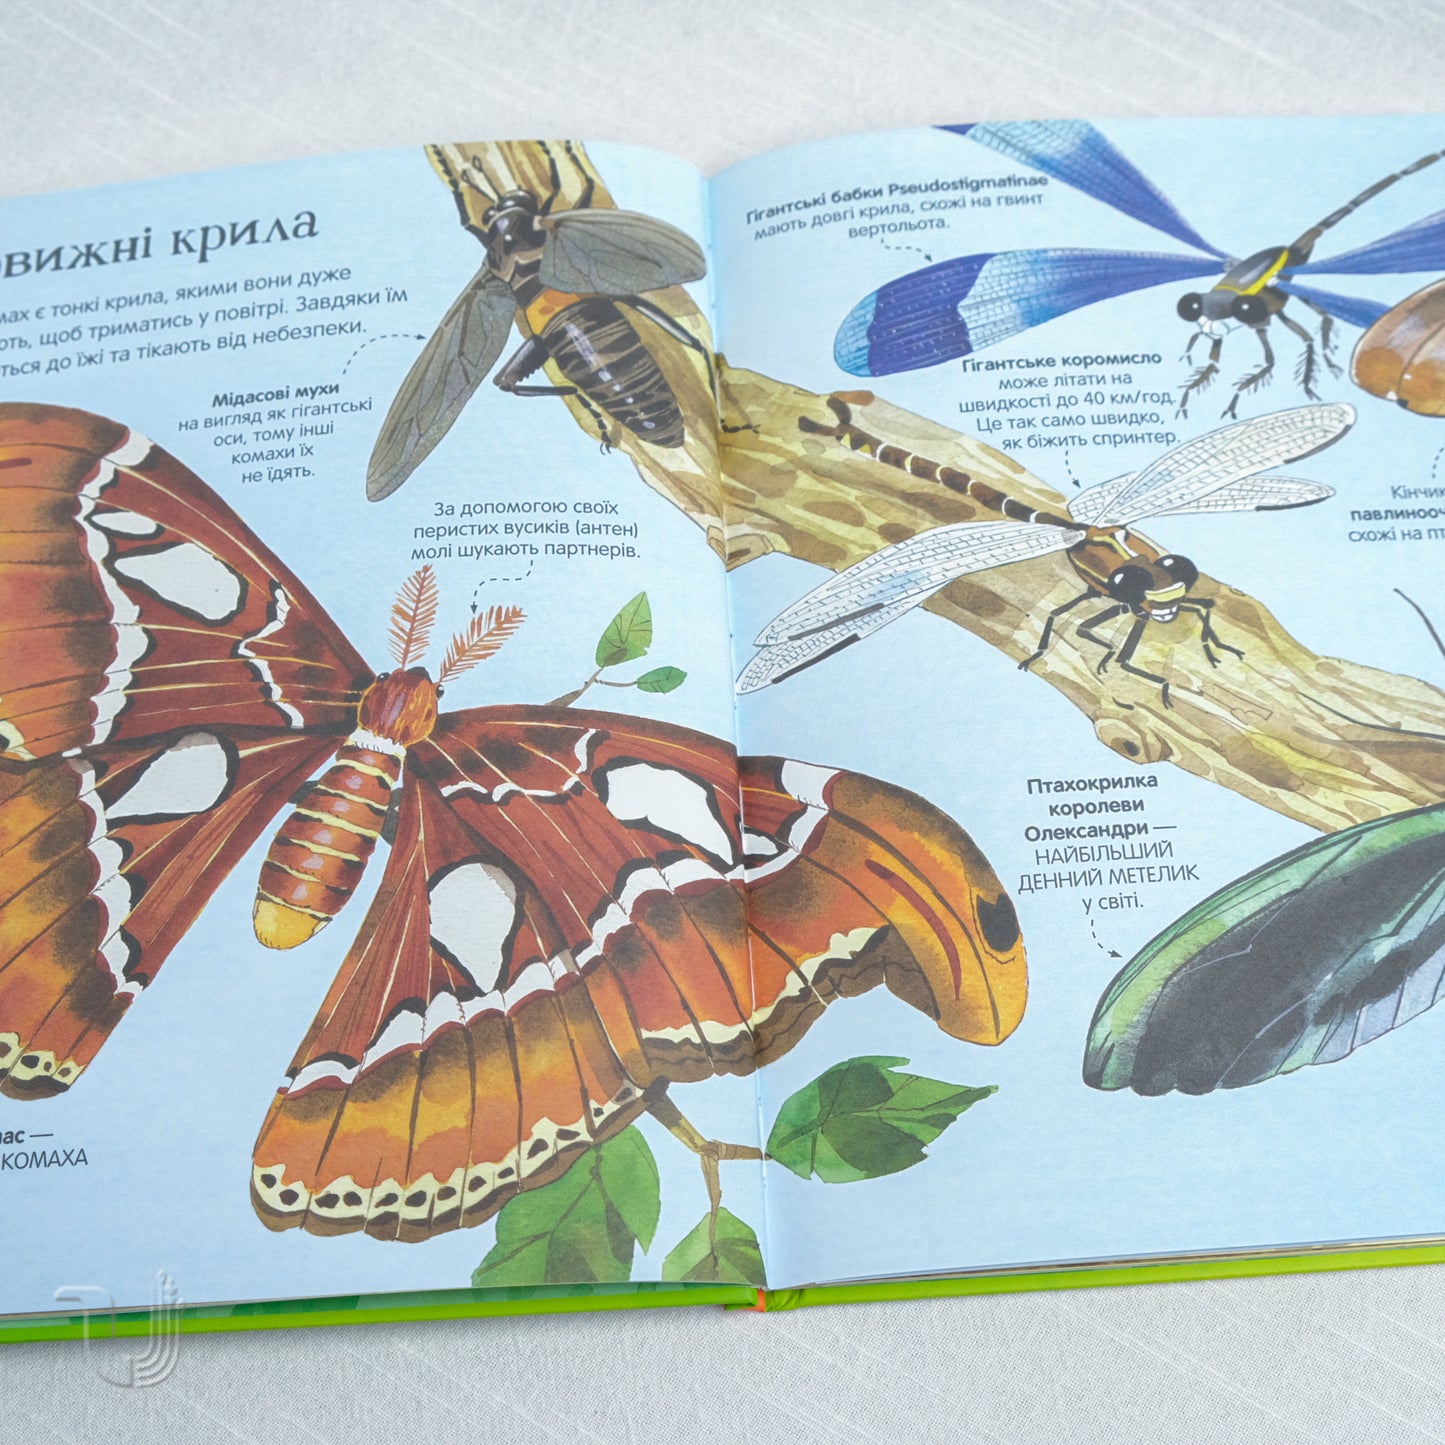 Big book of insects and not only